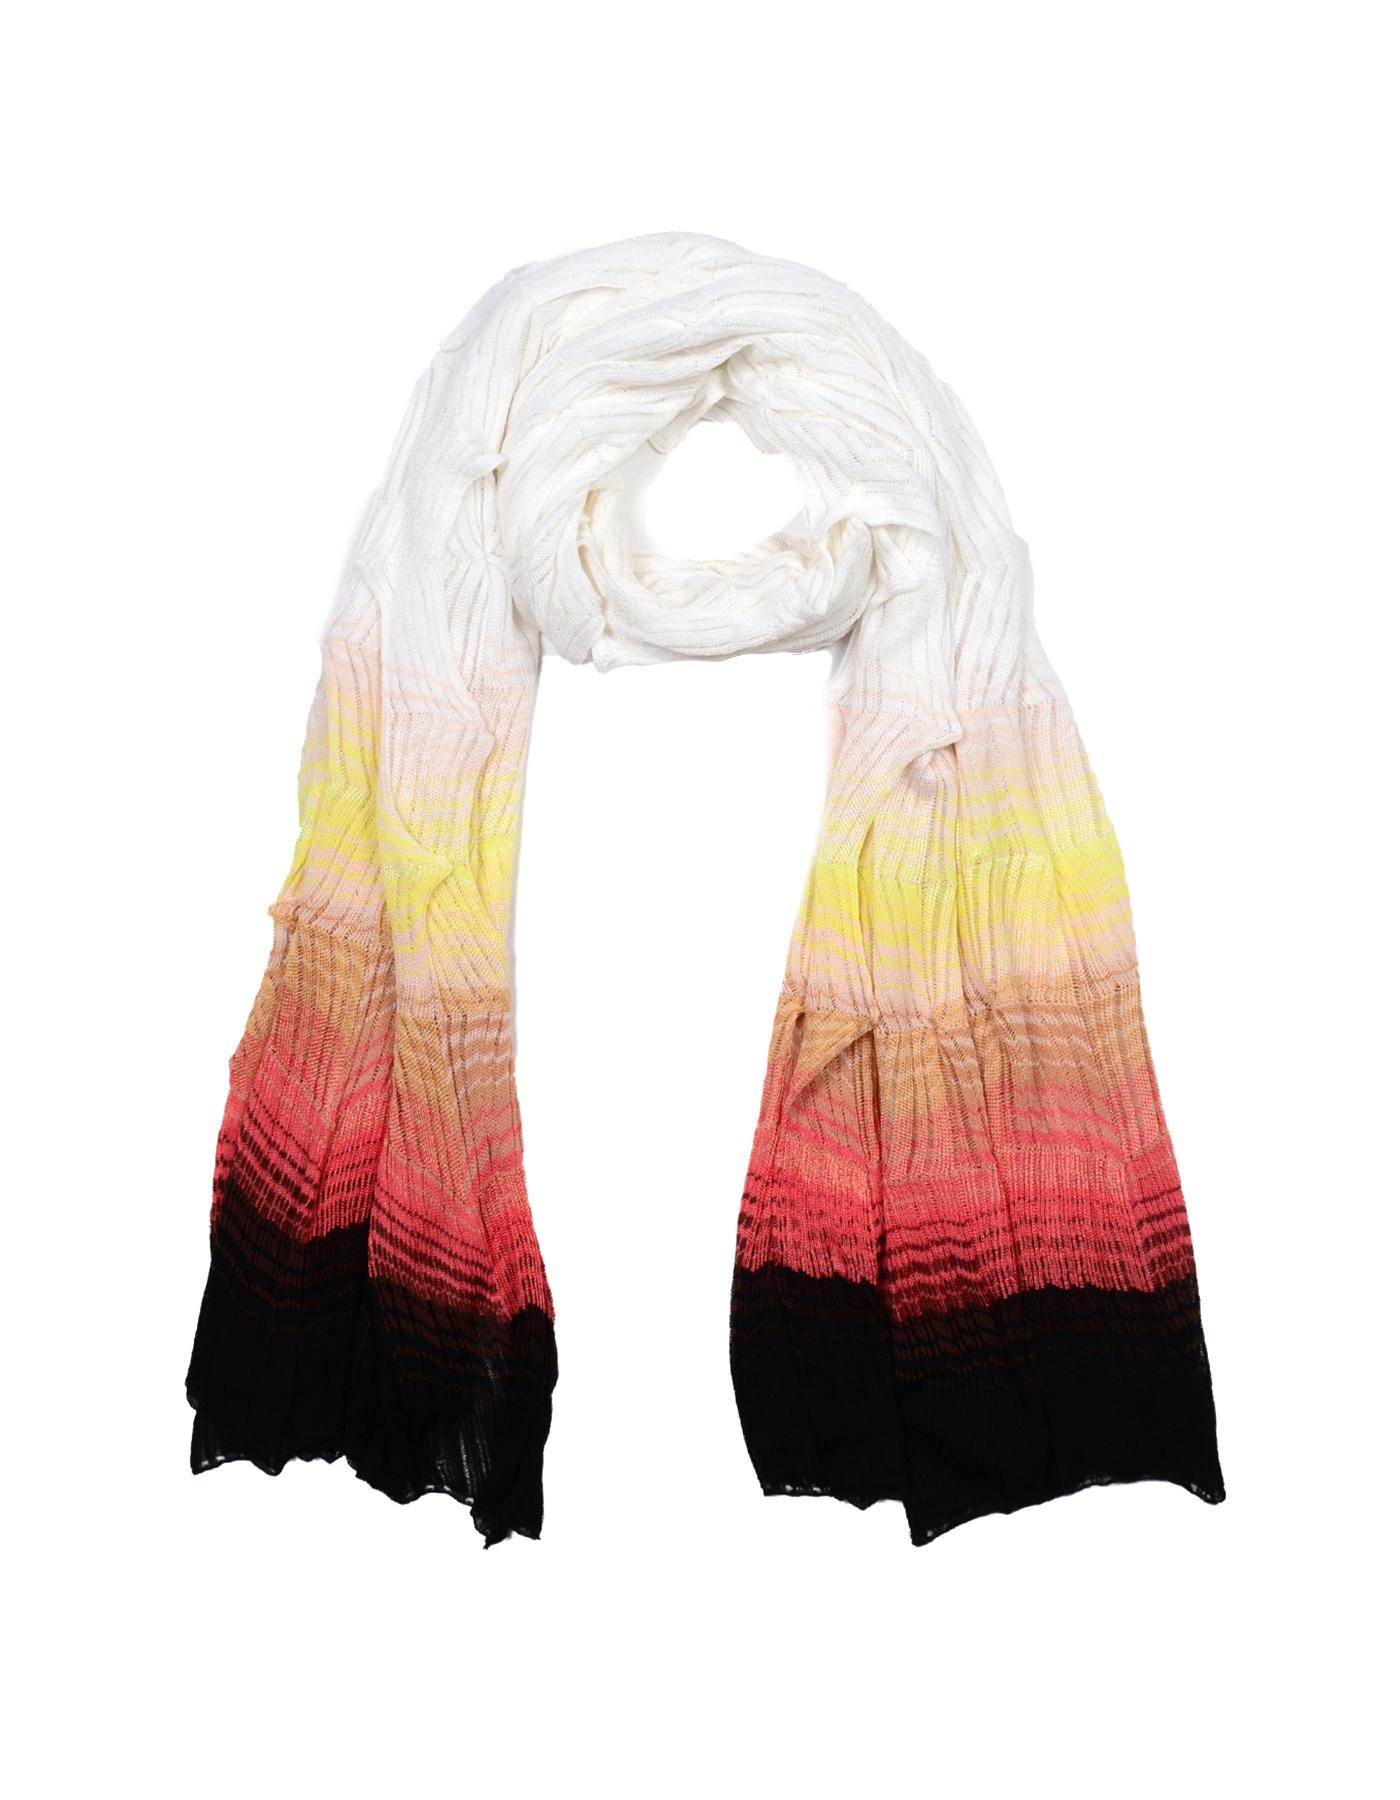 Missoni White/Multicolor Chevron Knit Scarf

Made In: Italy 
Color: White, multicolor 
Materials: No composition tag, knit material 
Overall Condition: Excellent pre-owned condition with exception of very minor pulls in fabric 

Measurements: 
30